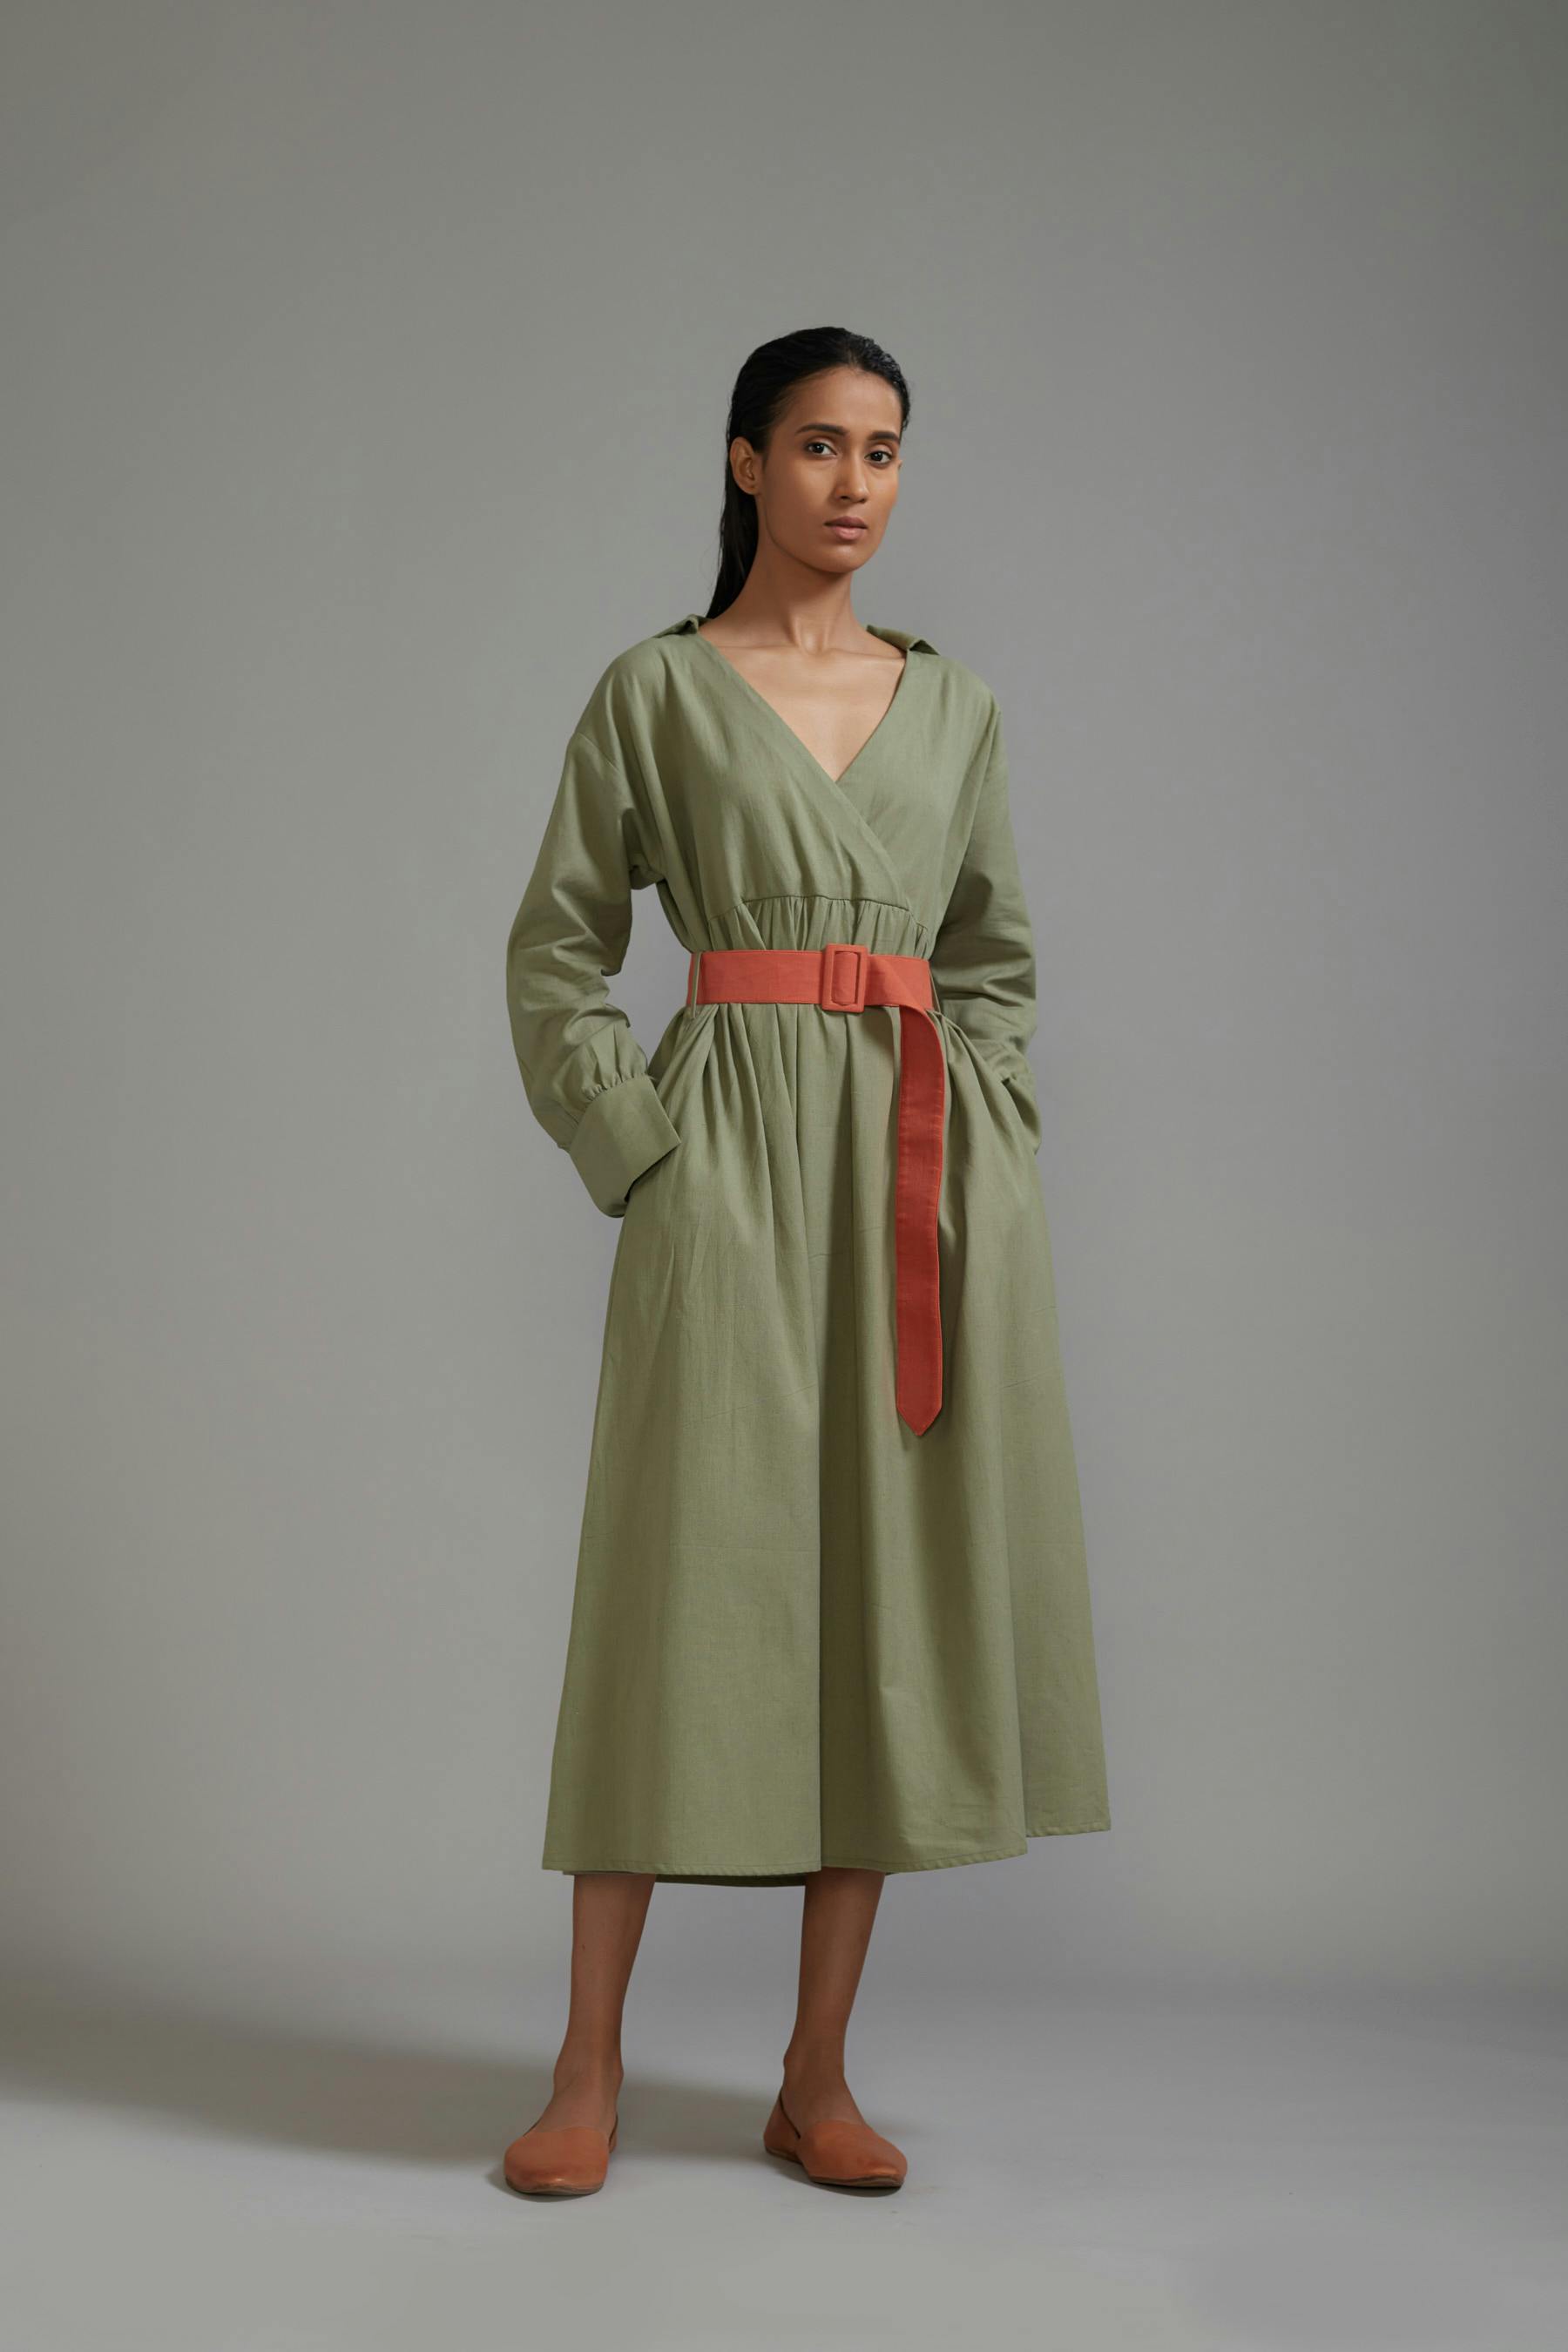 Thumbnail preview #2 for Green Safari Belted Dress